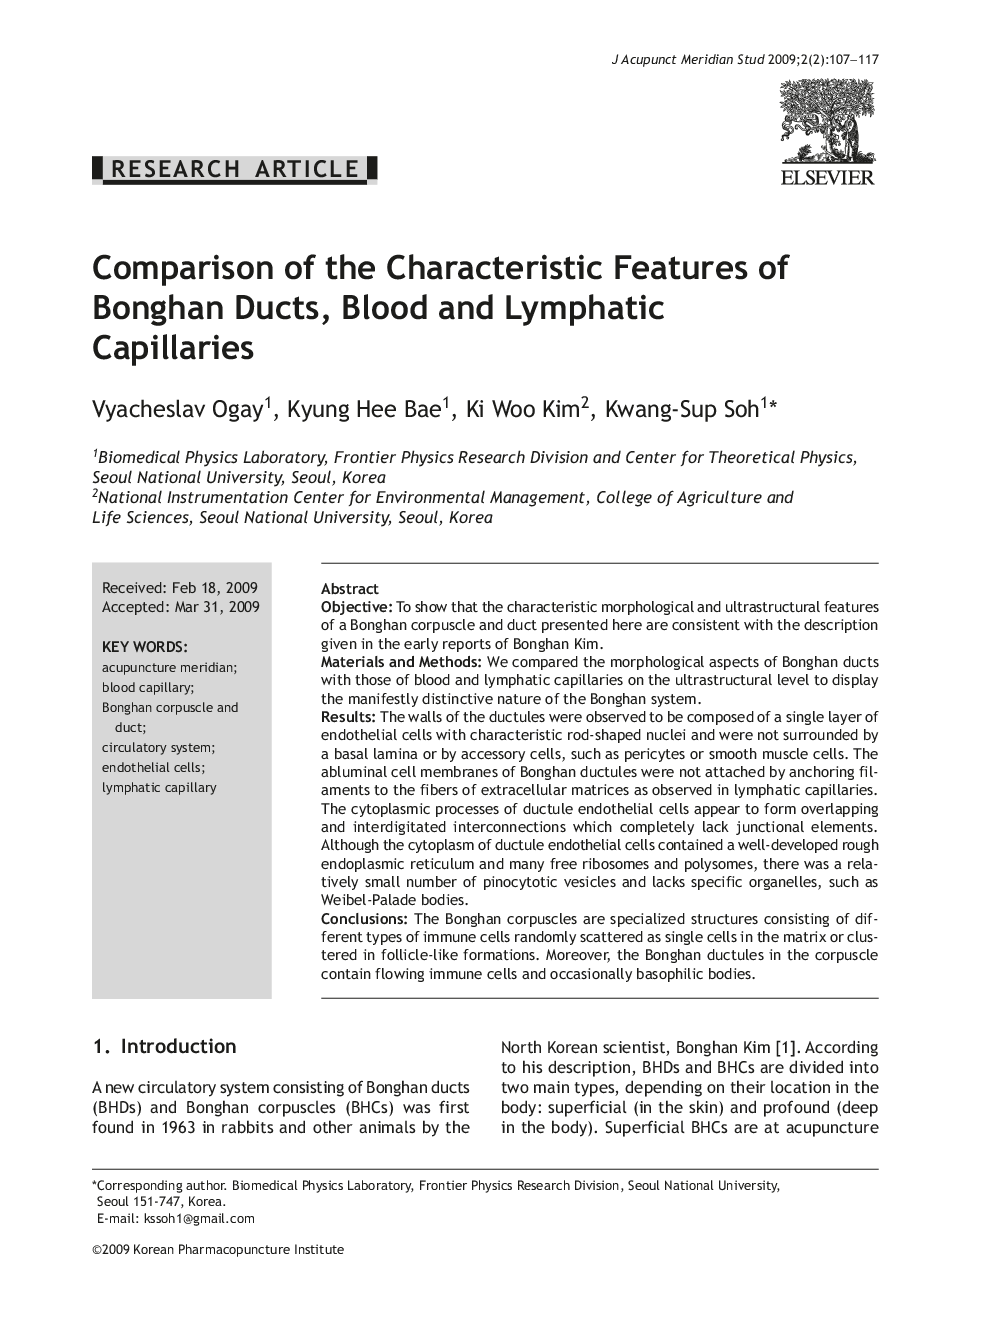 Comparison of the Characteristic Features of Bonghan Ducts, Blood and Lymphatic Capillaries